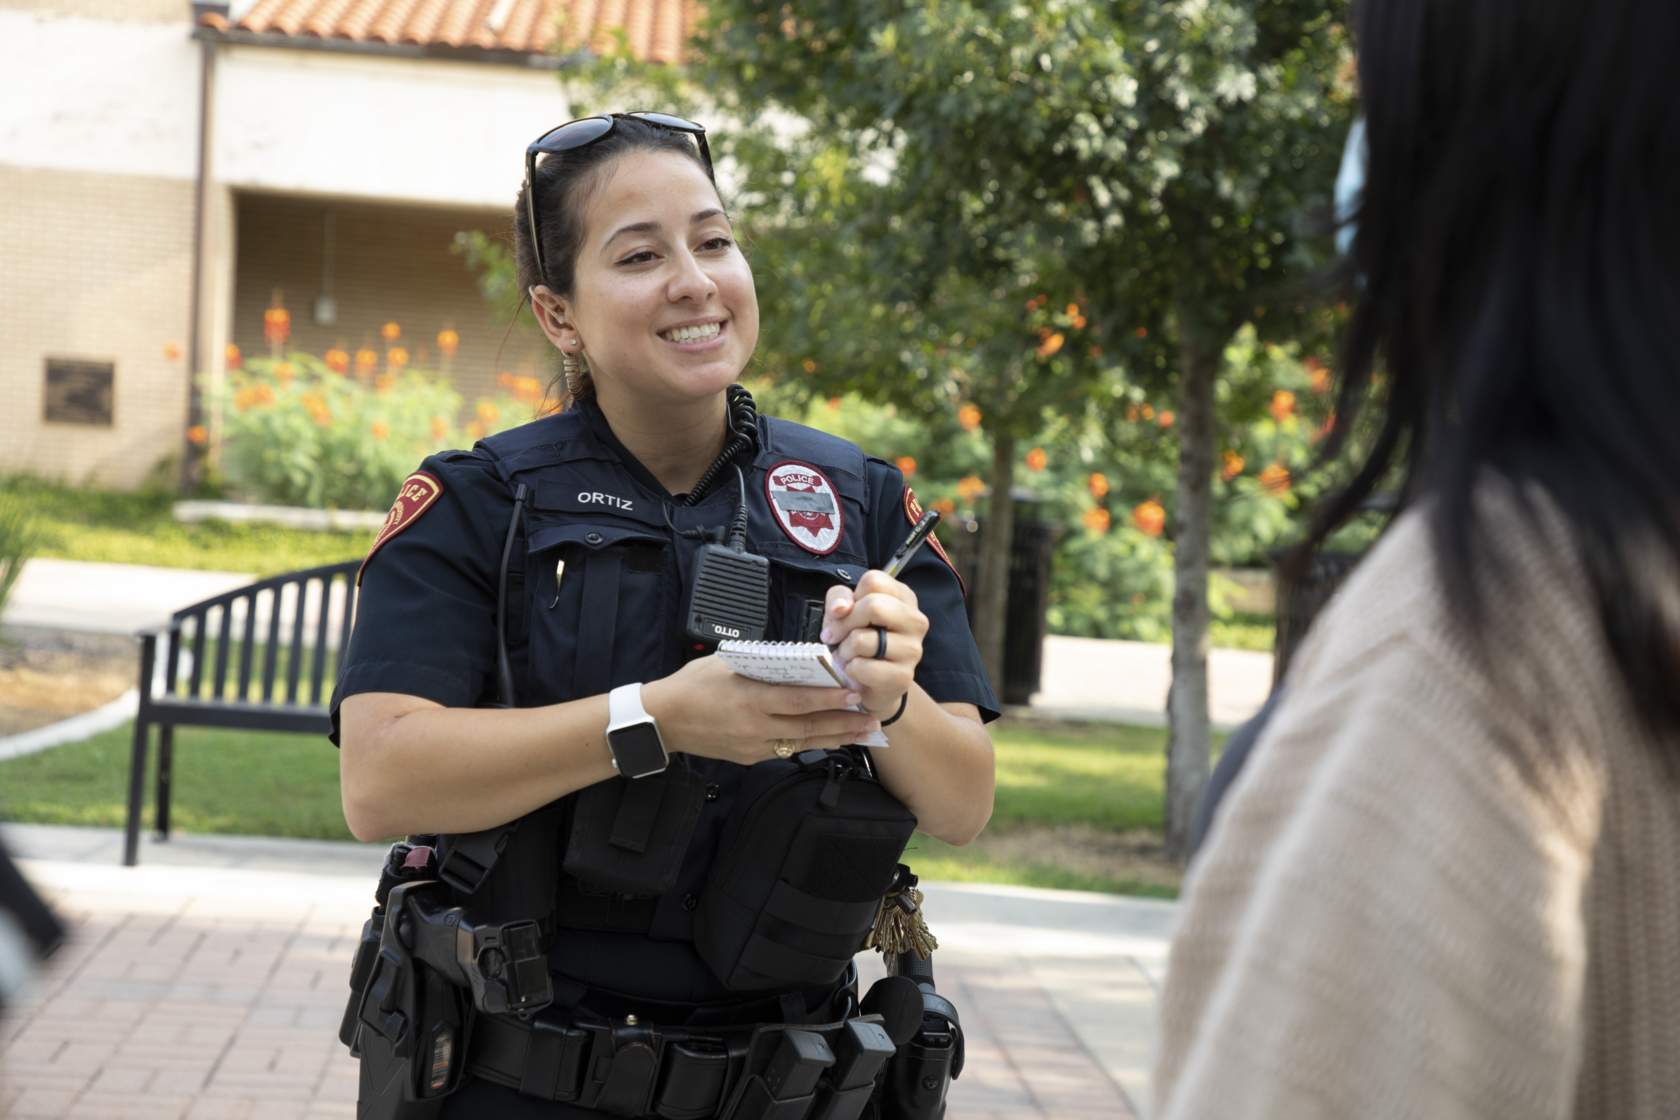 Officer Ortiz Smiling with Notepad